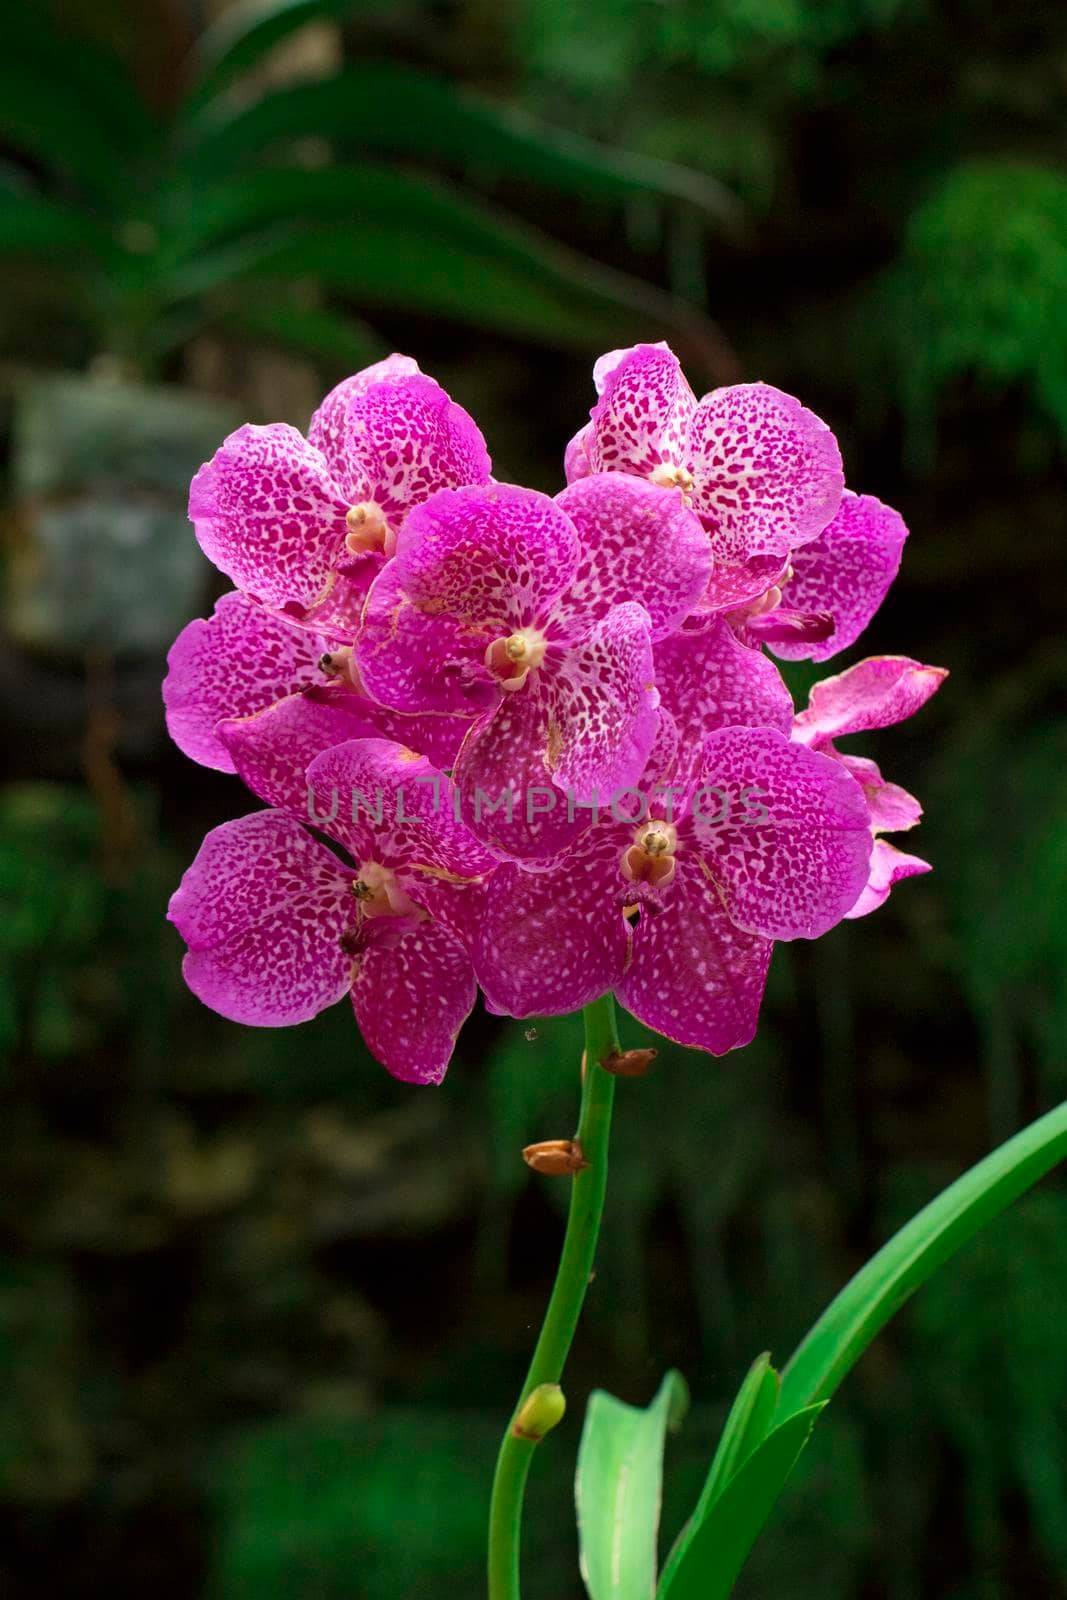 Image of beautiful purple orchid flowers in the garden. by yod67